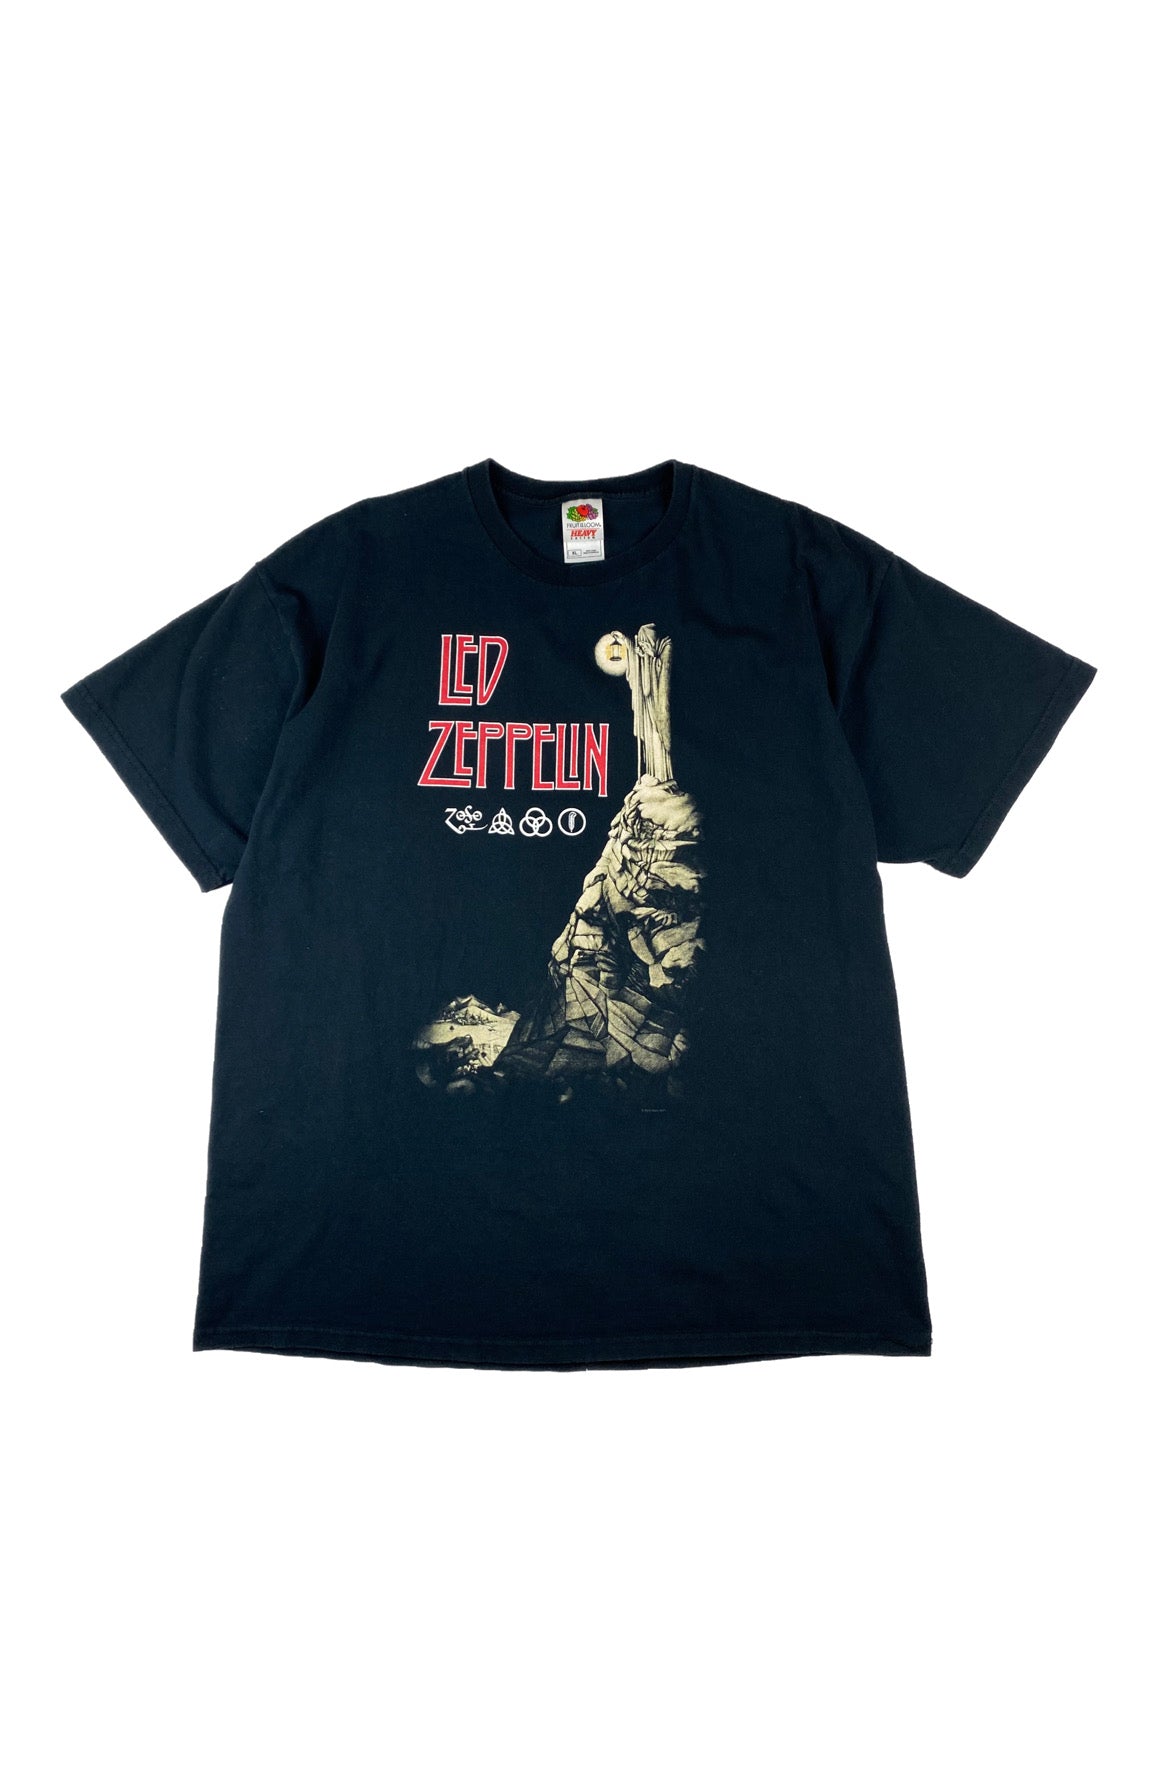 2005 Led Zeppelin Stairway To Heaven Band Tee •XL